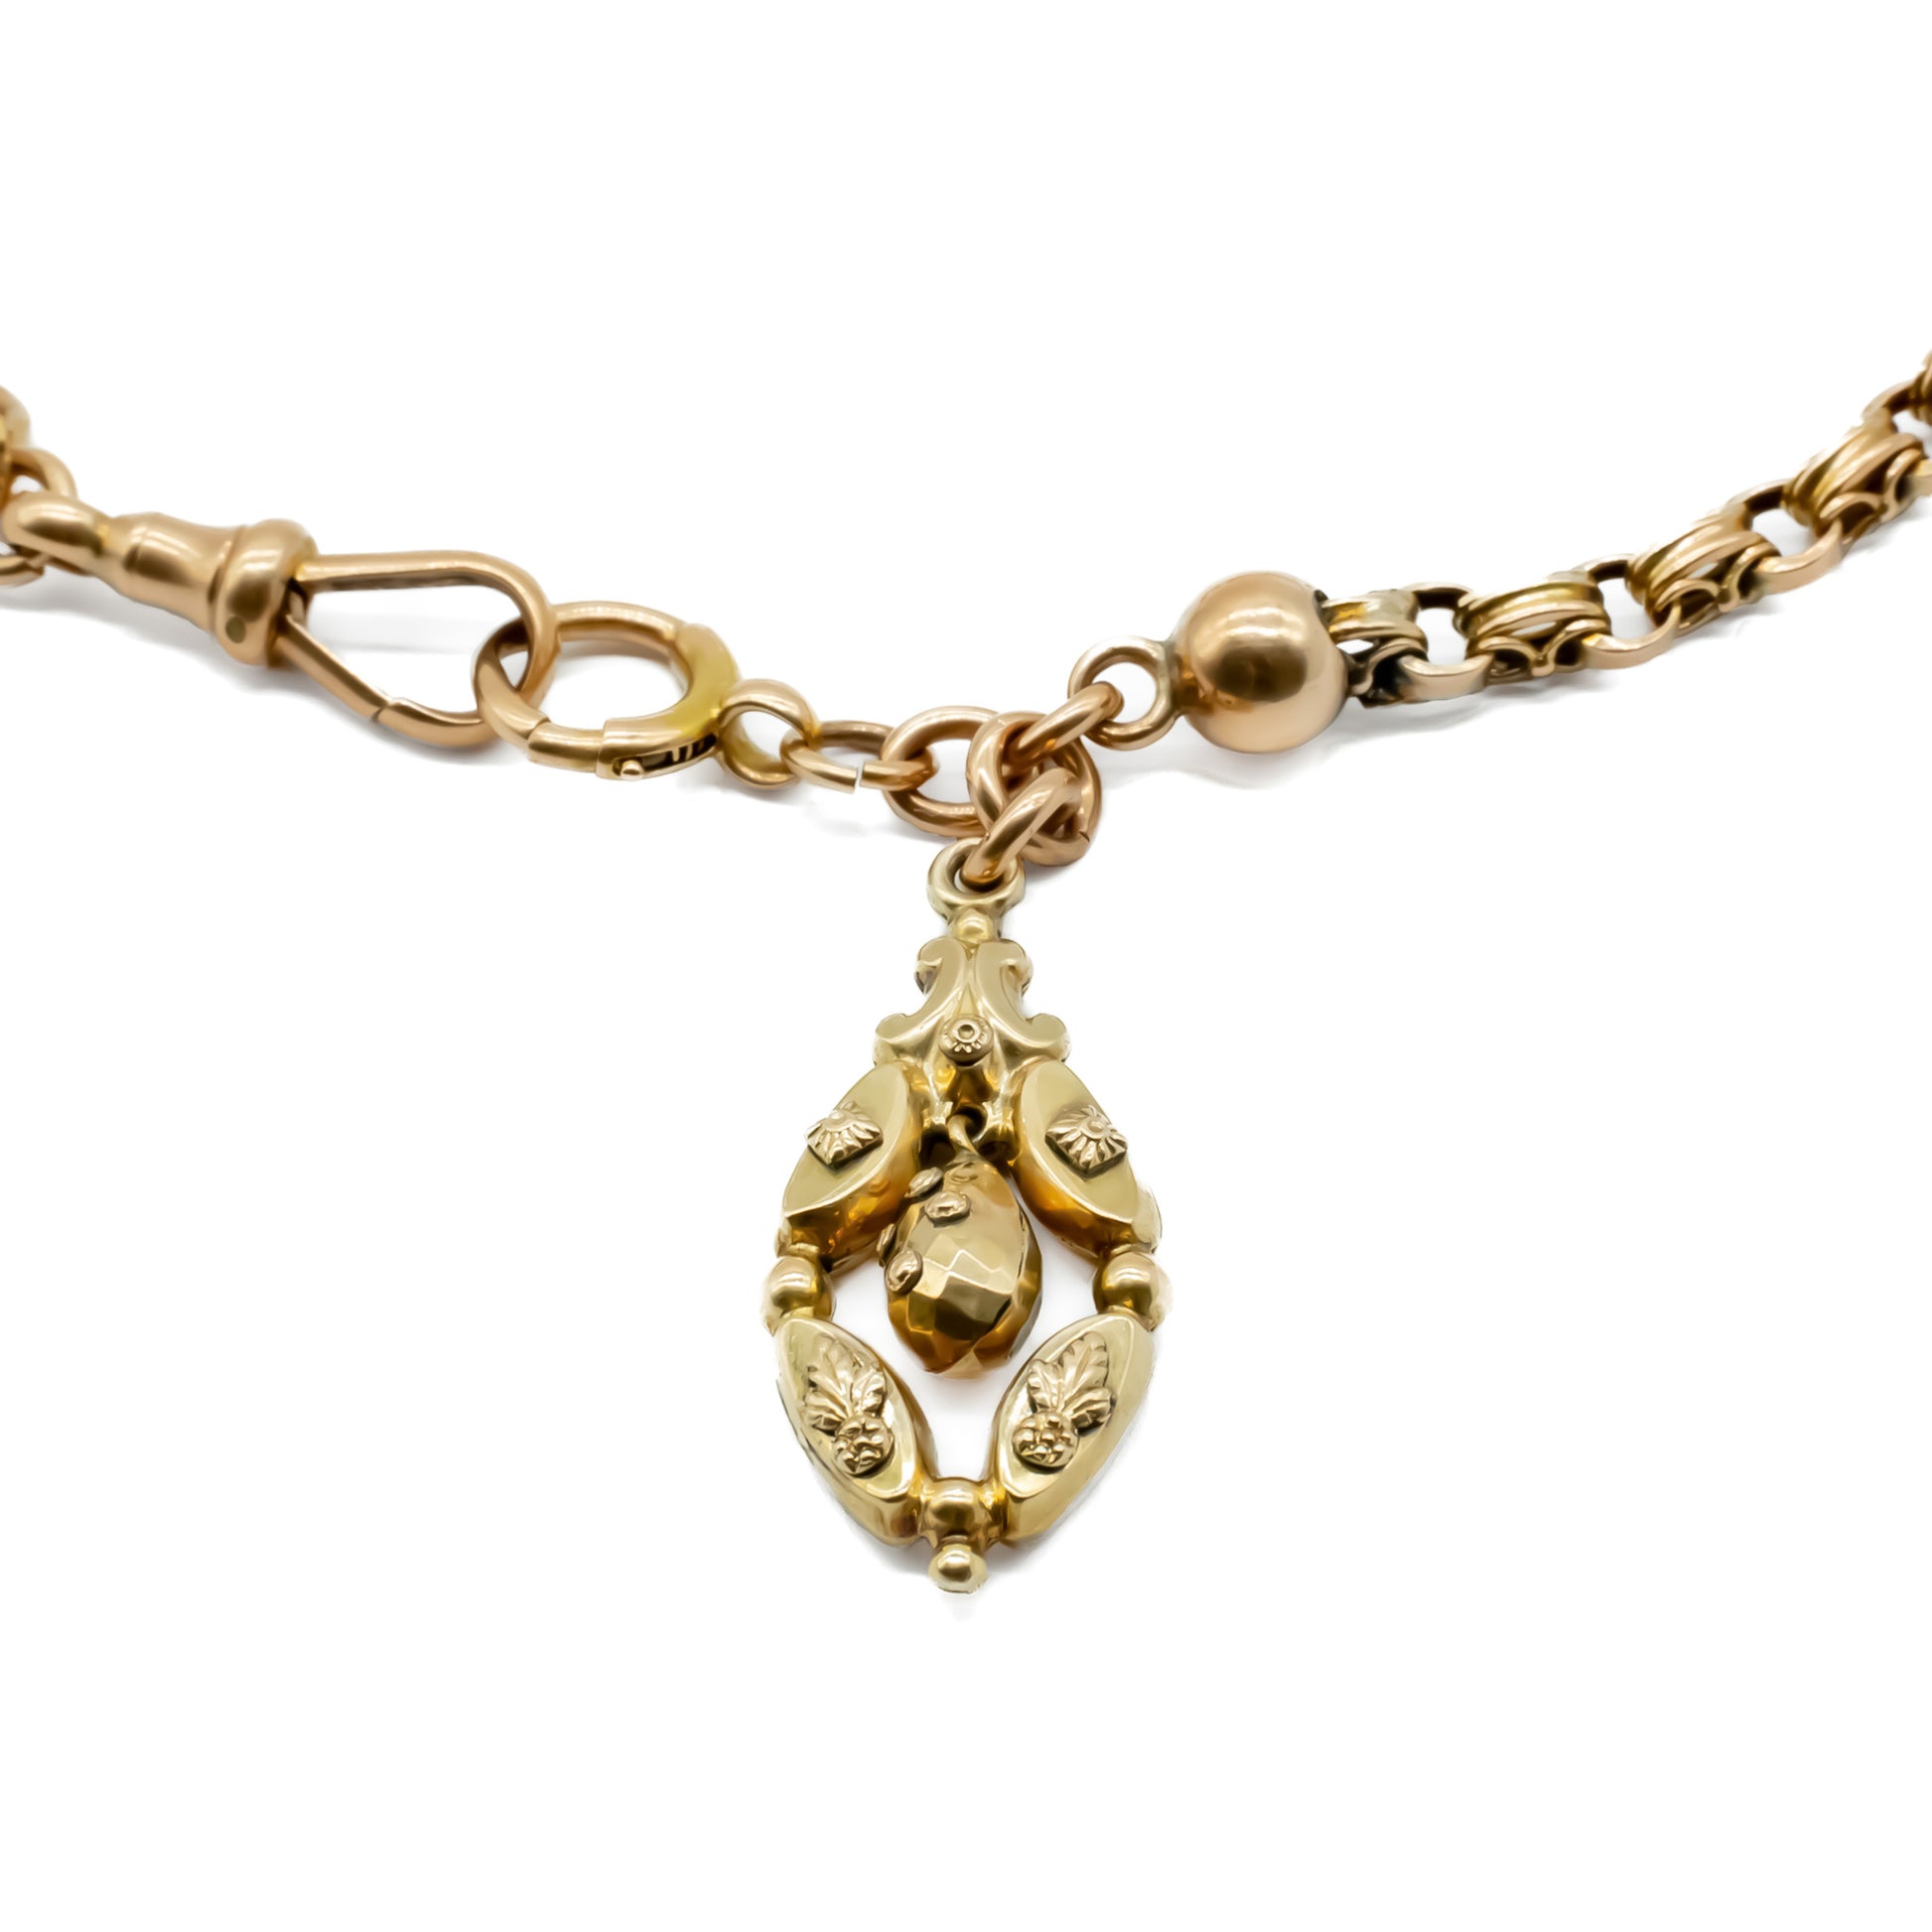 Very ornate Victorian fancy link 9ct rose/yellow gold chain with a beautiful repoussé dangling drop.